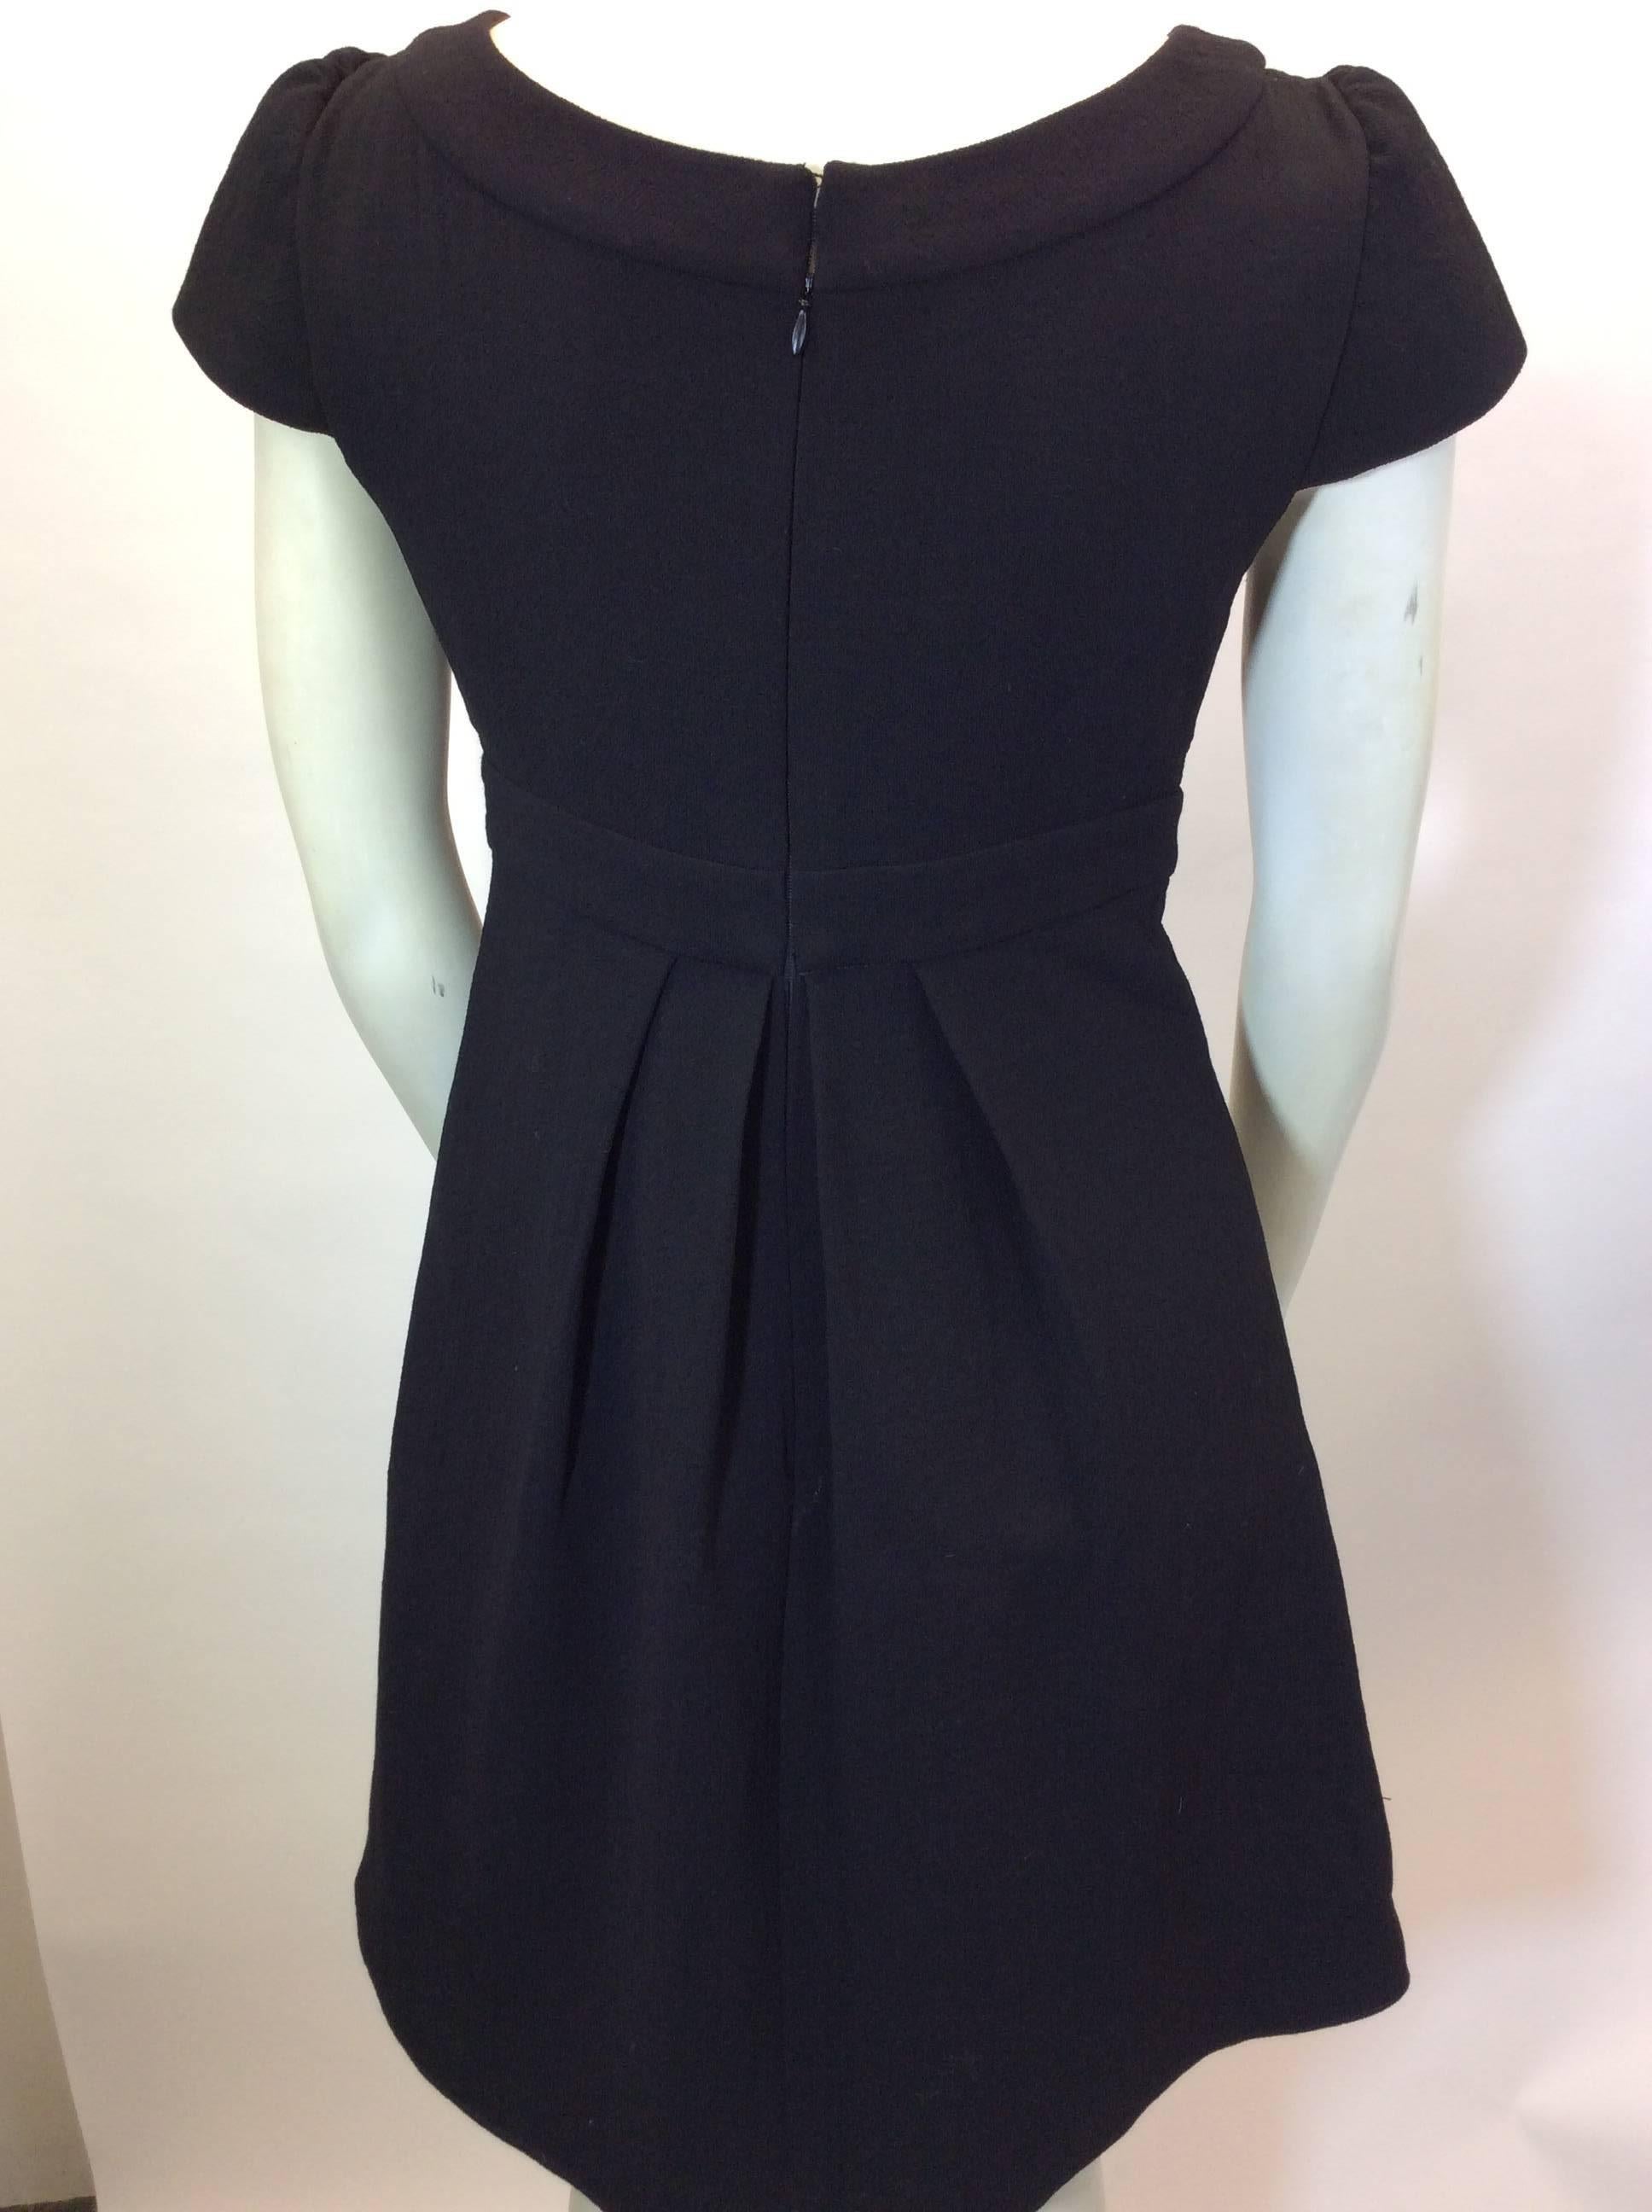 Women's Armani Black Pleated Cocktail Dress For Sale